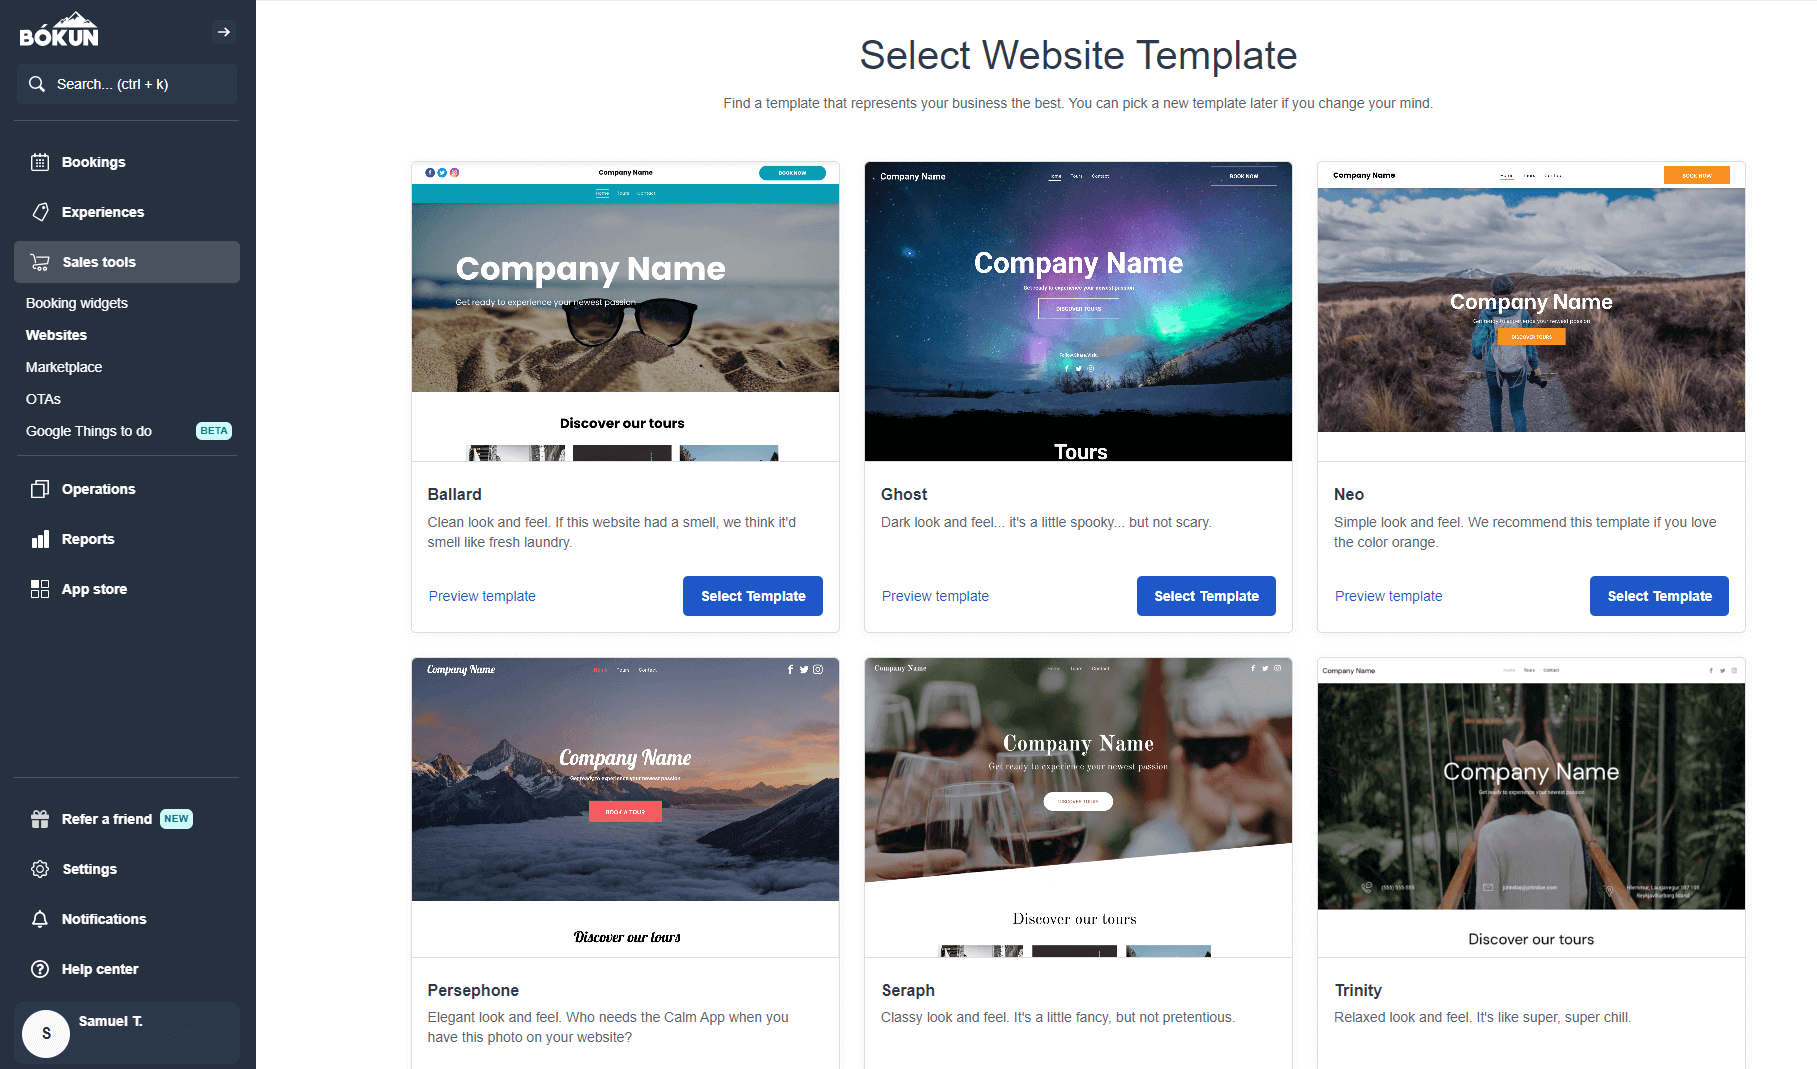 Select Website Template: Find a template that represents your business the best. You can pick a new template later if you change your mind.